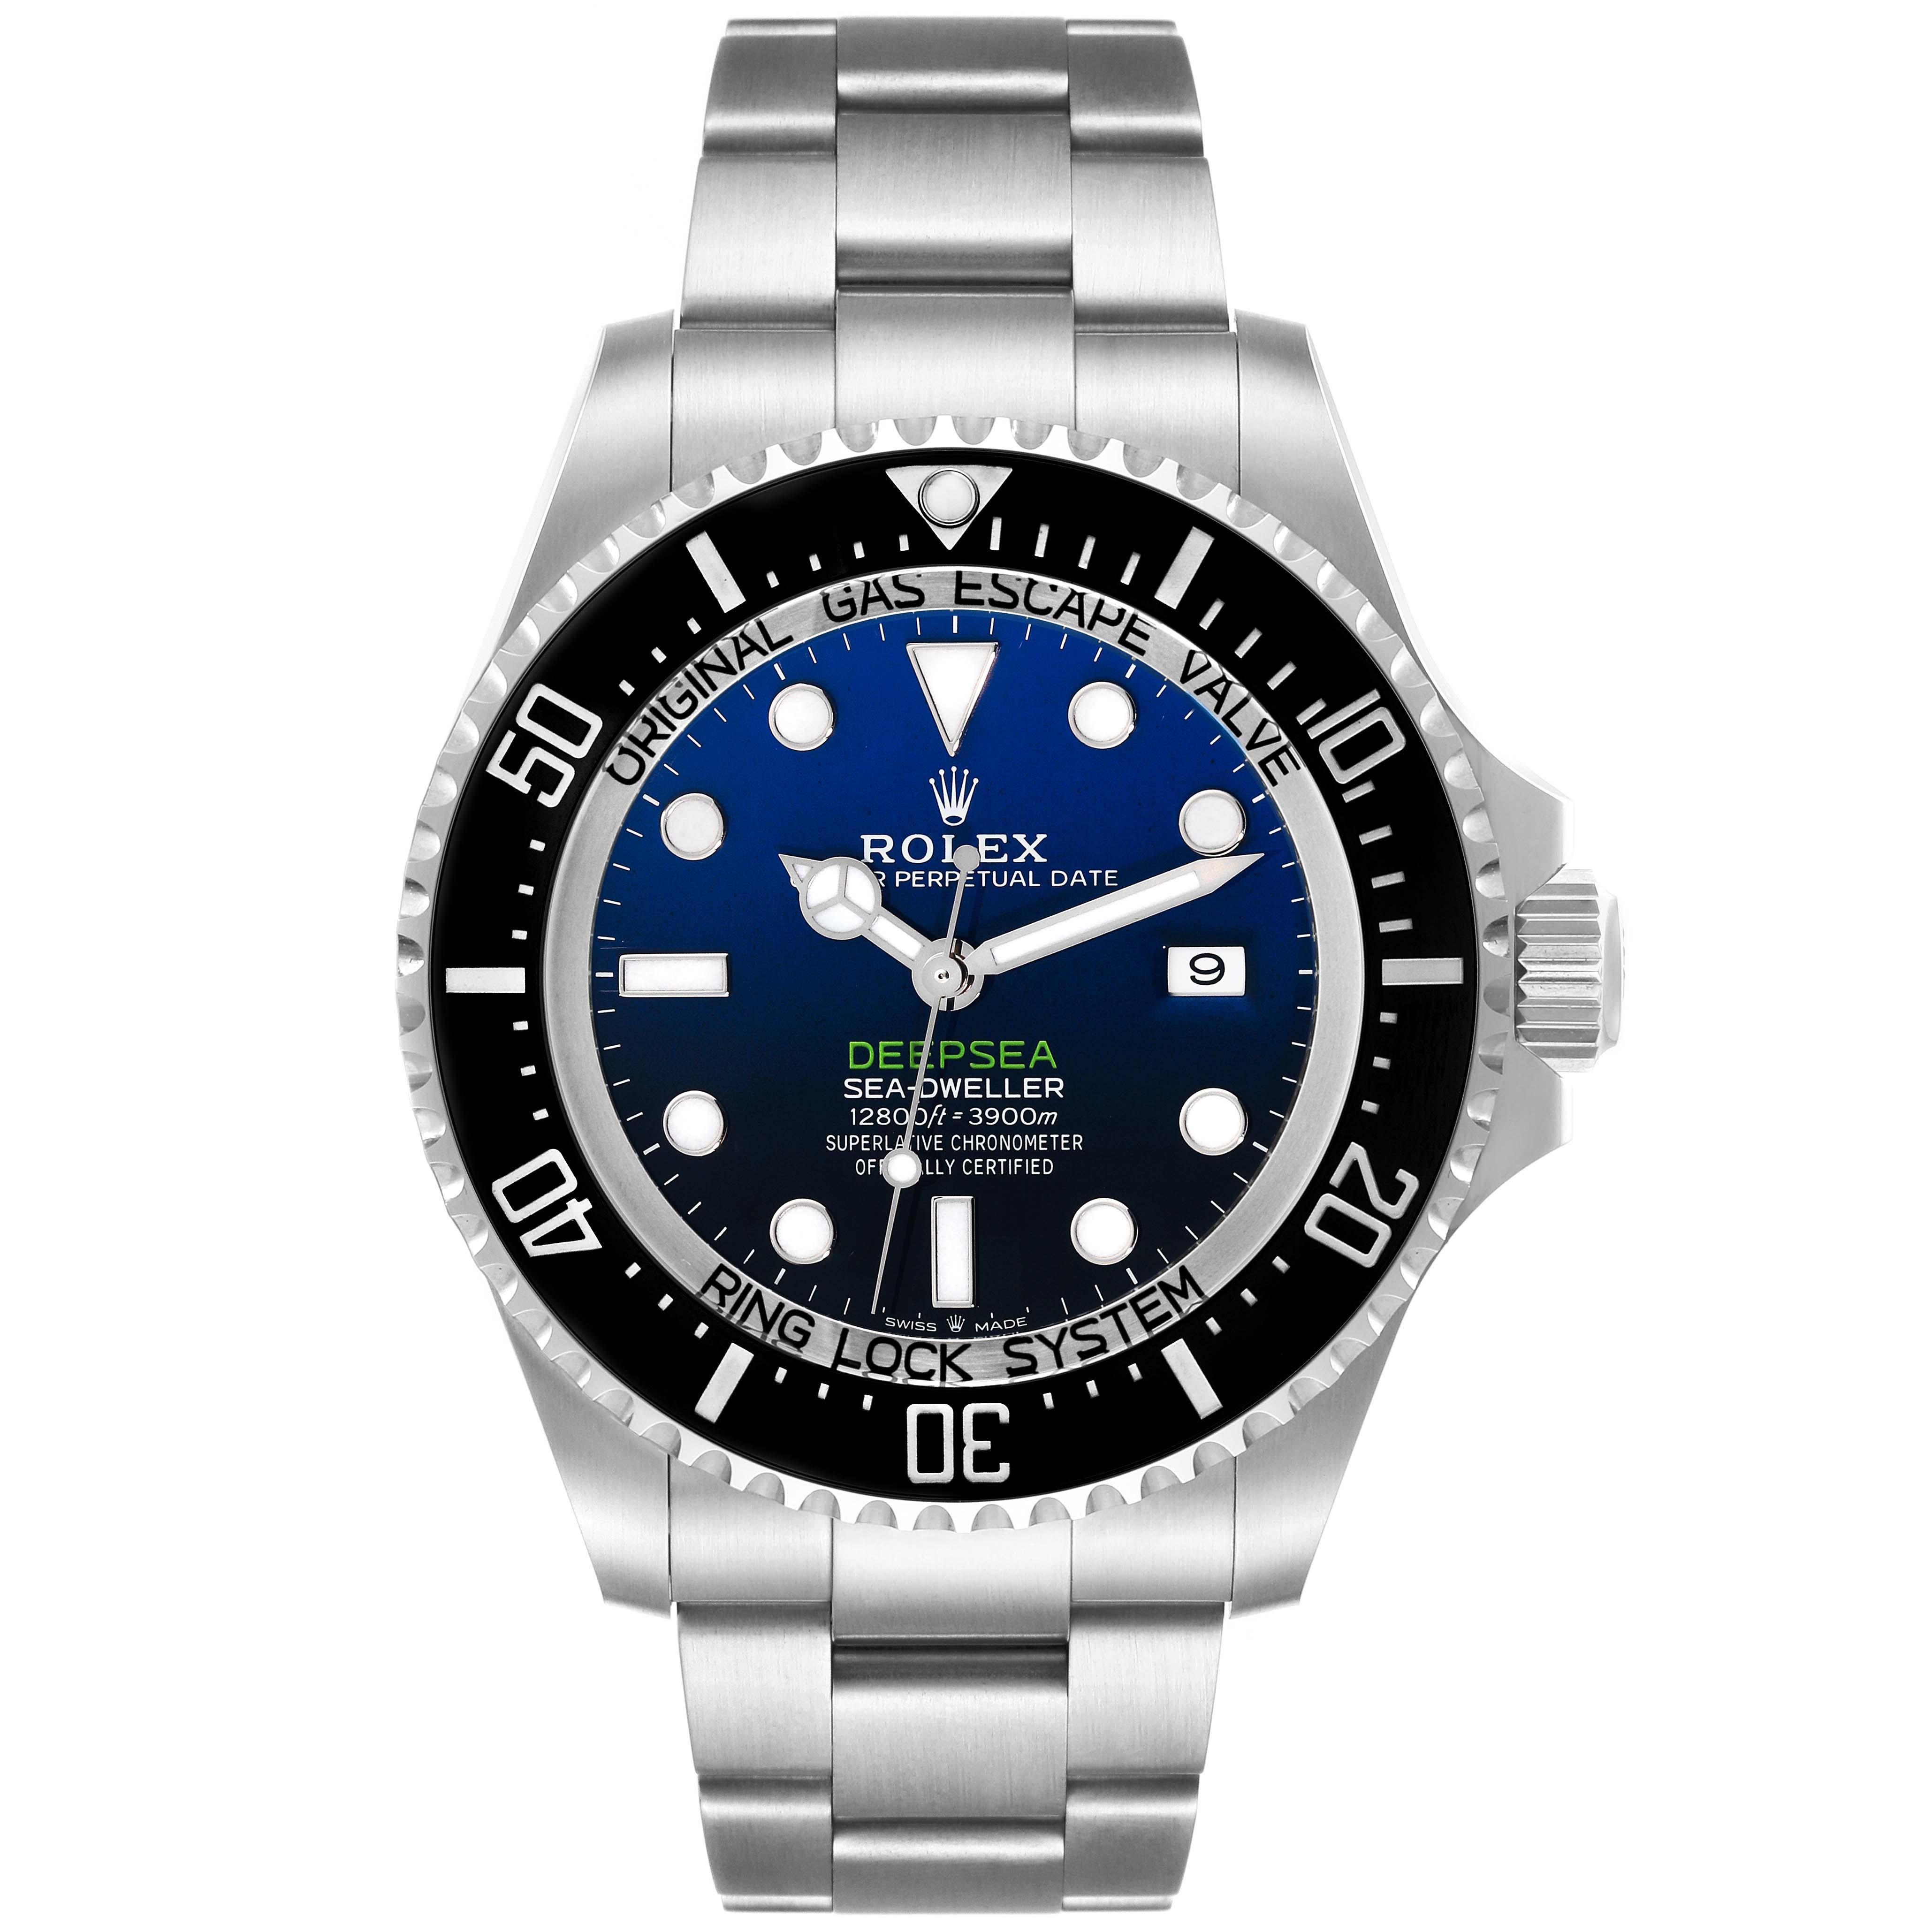 Rolex Seadweller Deepsea 44 Cameron D-Blue Dial Steel Mens Watch 126660 Box Card. Officially certified chronometer automatic self-winding movement. Stainless steel oyster case 44 mm in diameter. Rolex logo on the crown. Special time-lapse